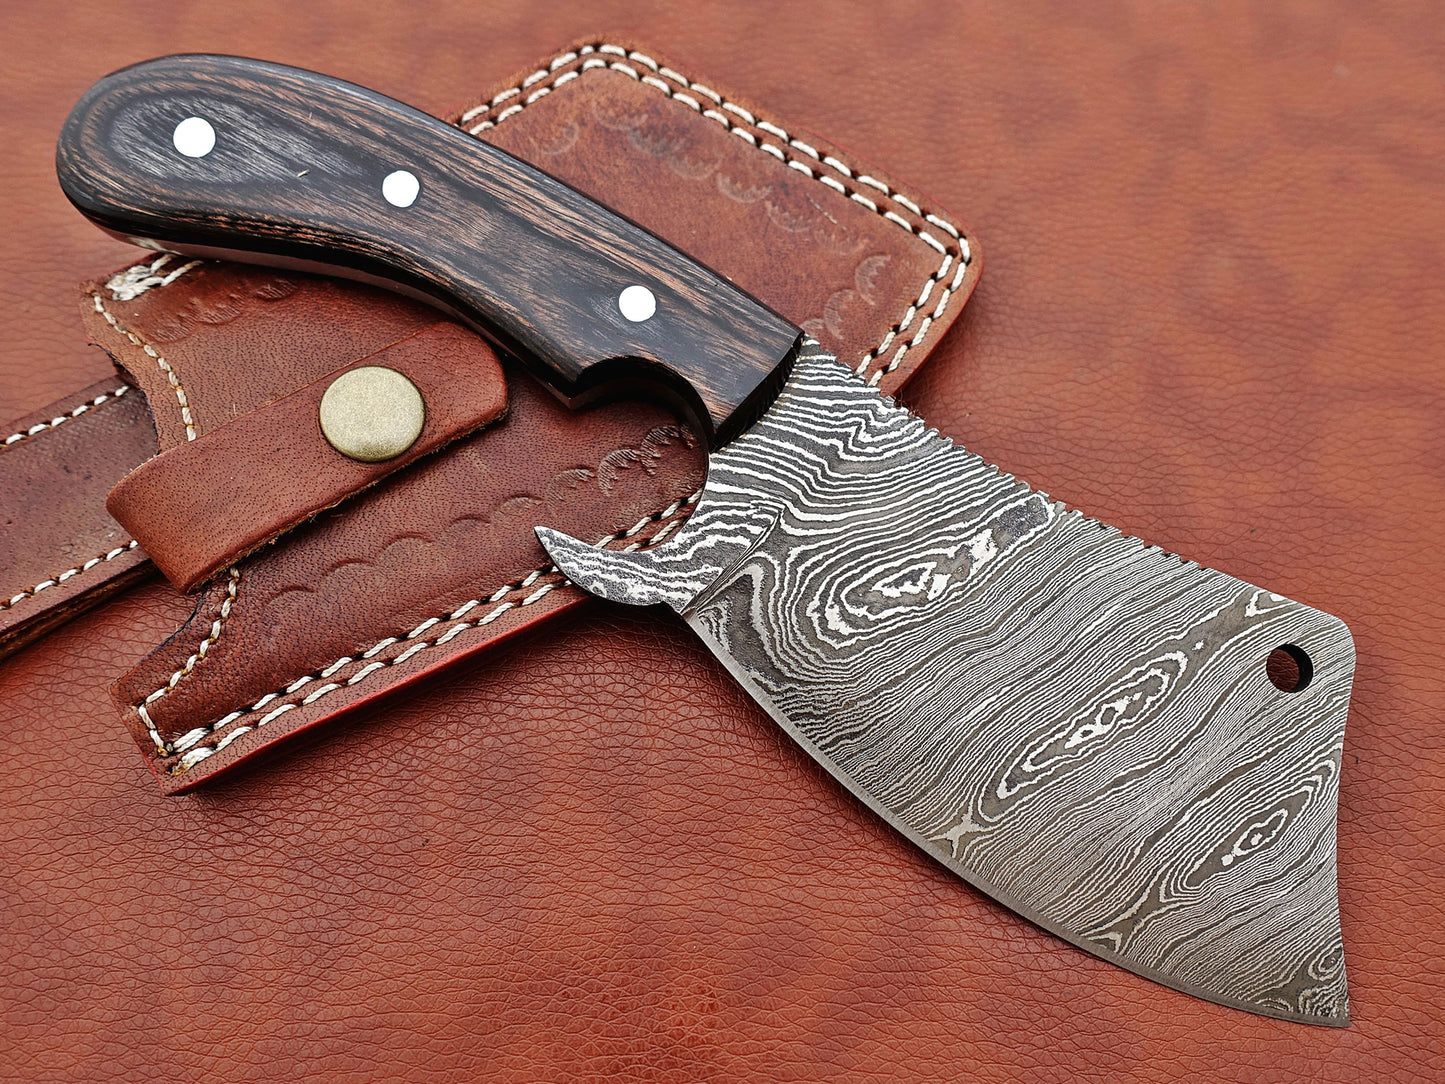 10" hand forged Twist Pattern Damascus steel meat Cleaver, 2 tone black Dollar wood scale chopper knife, Leather sheath included